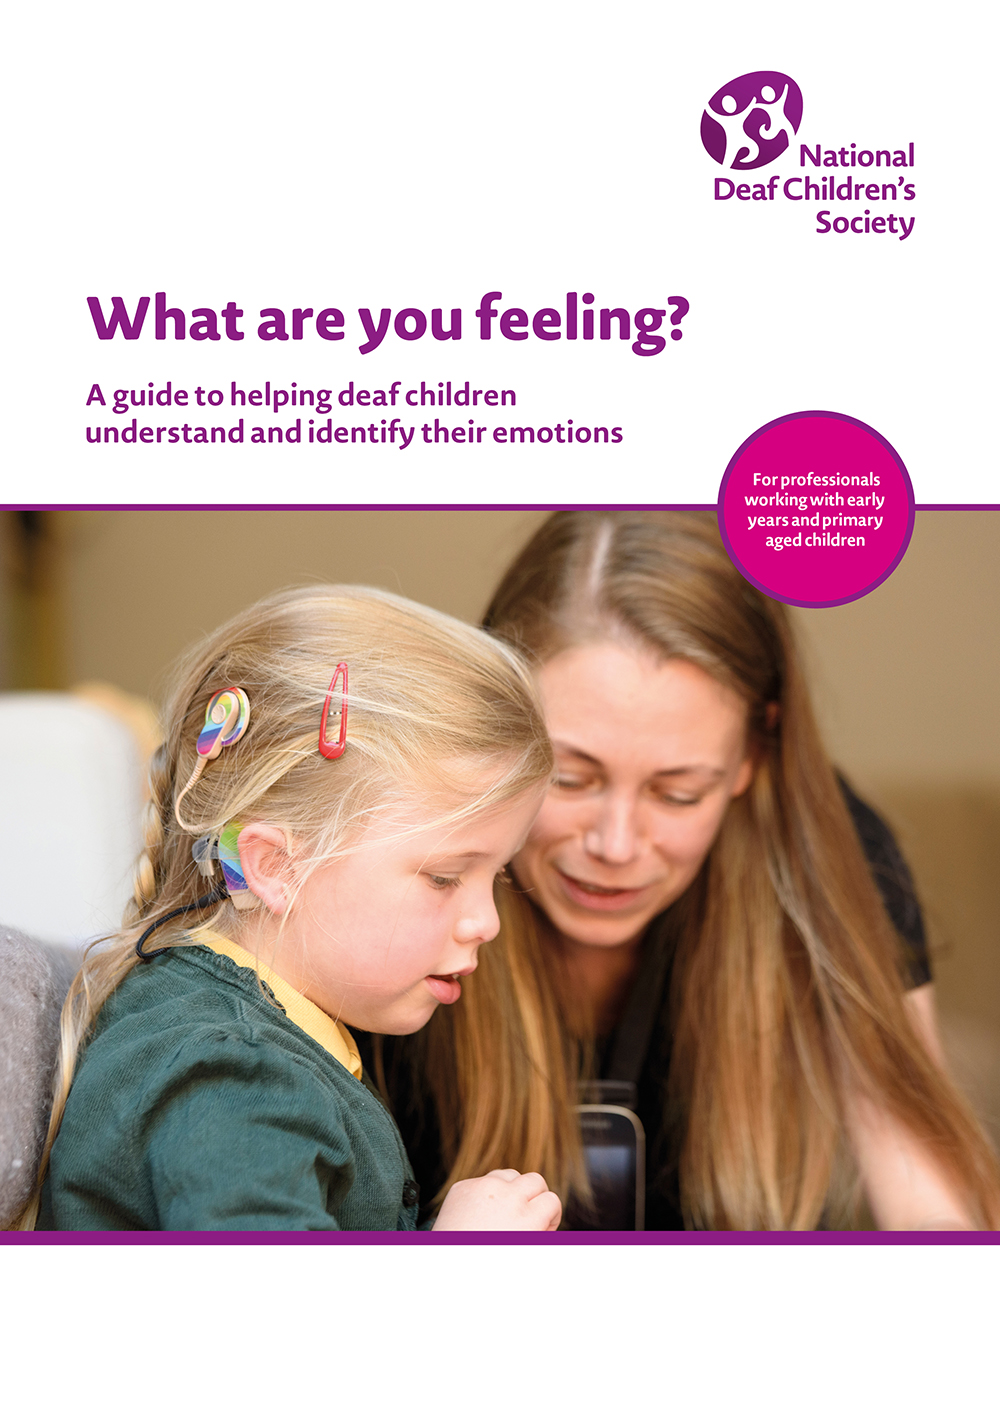 What are you feeling? A guide to help deaf children understand and identify their emotions